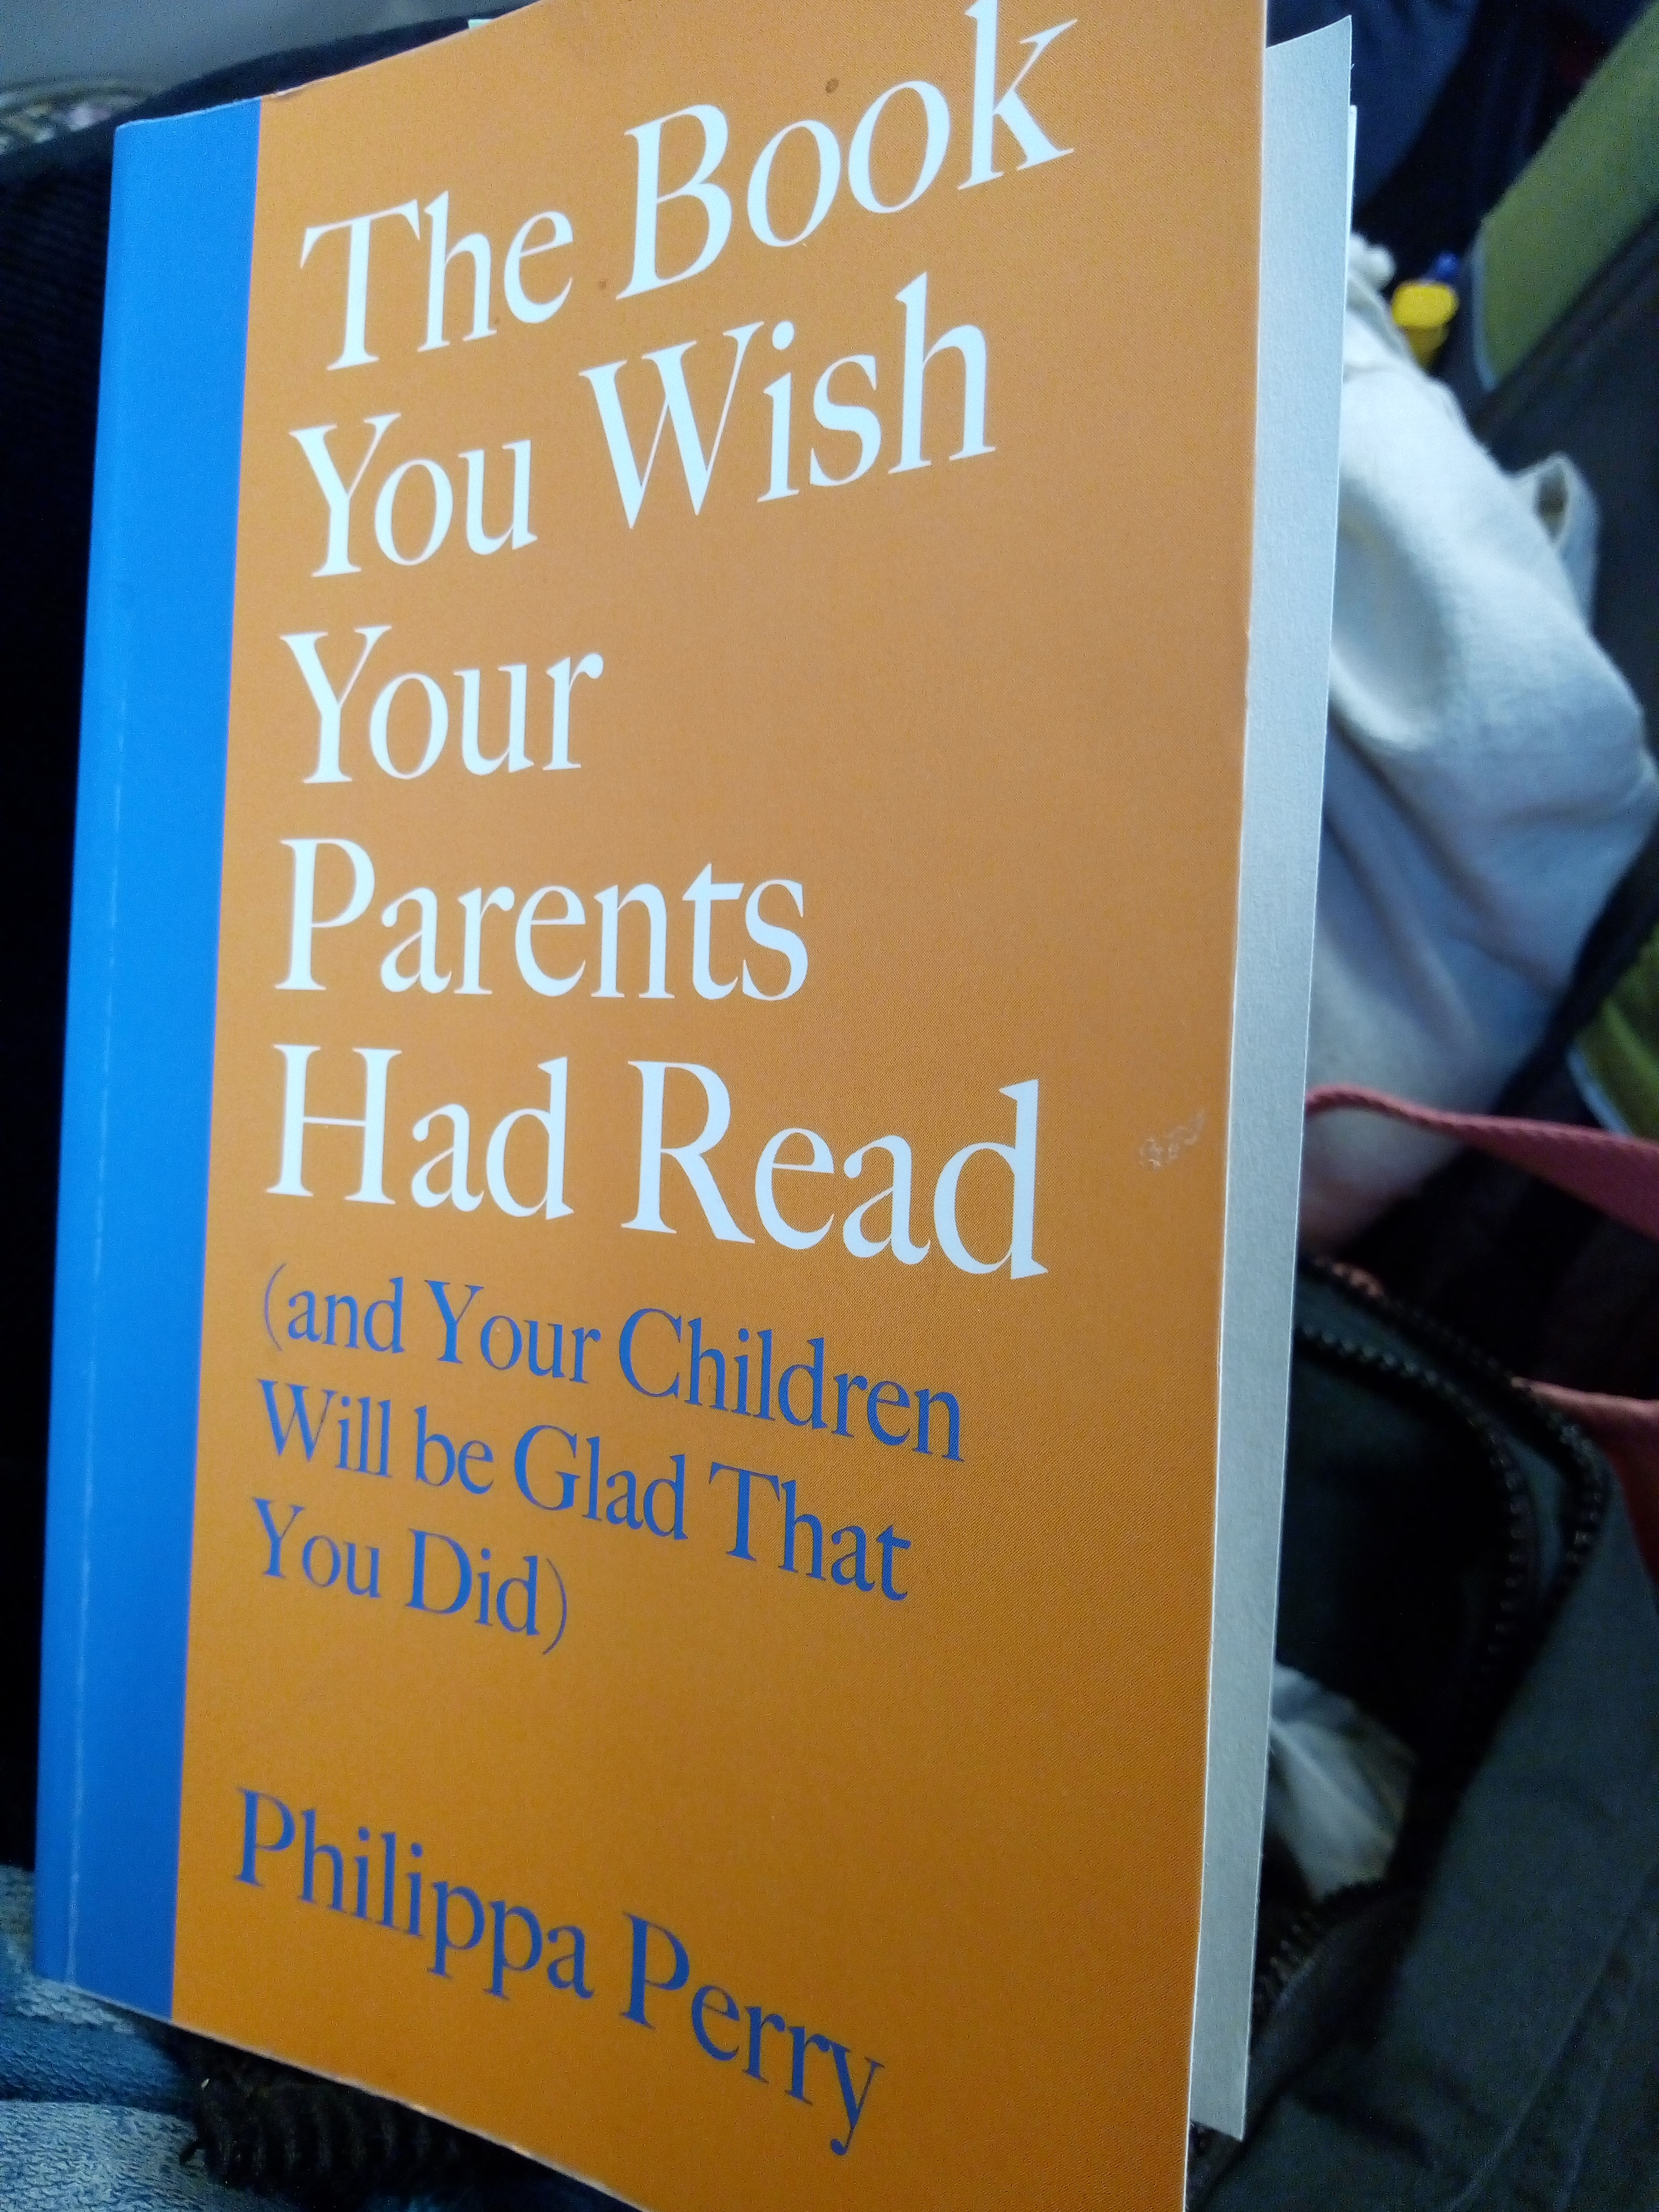 The book you wish your parents had read